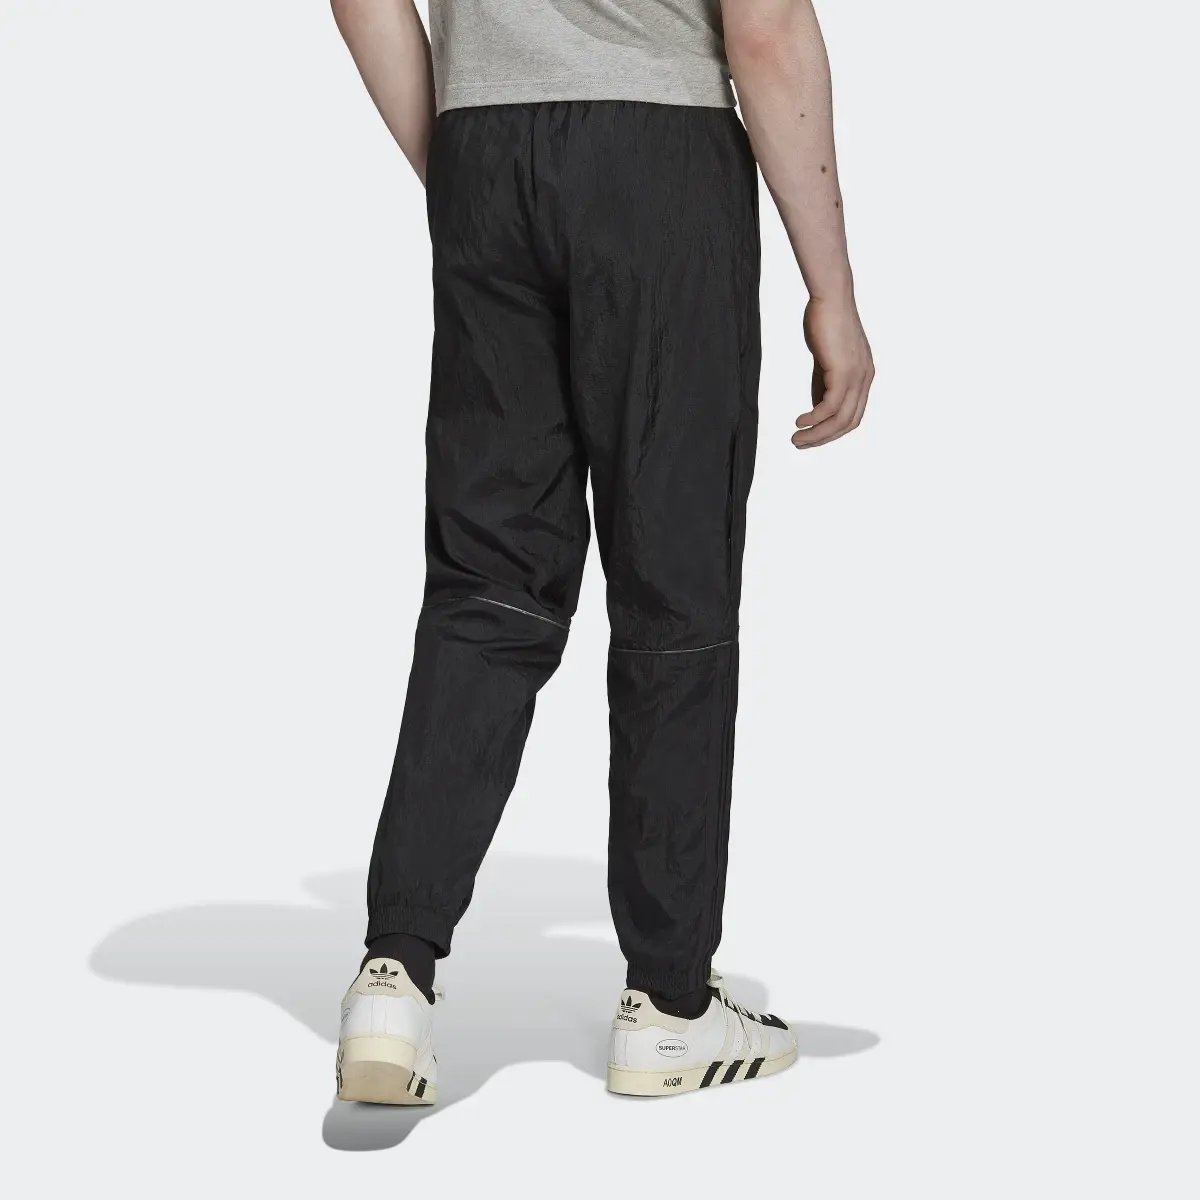 Adidas Reveal Material Mix Track Pants. 2